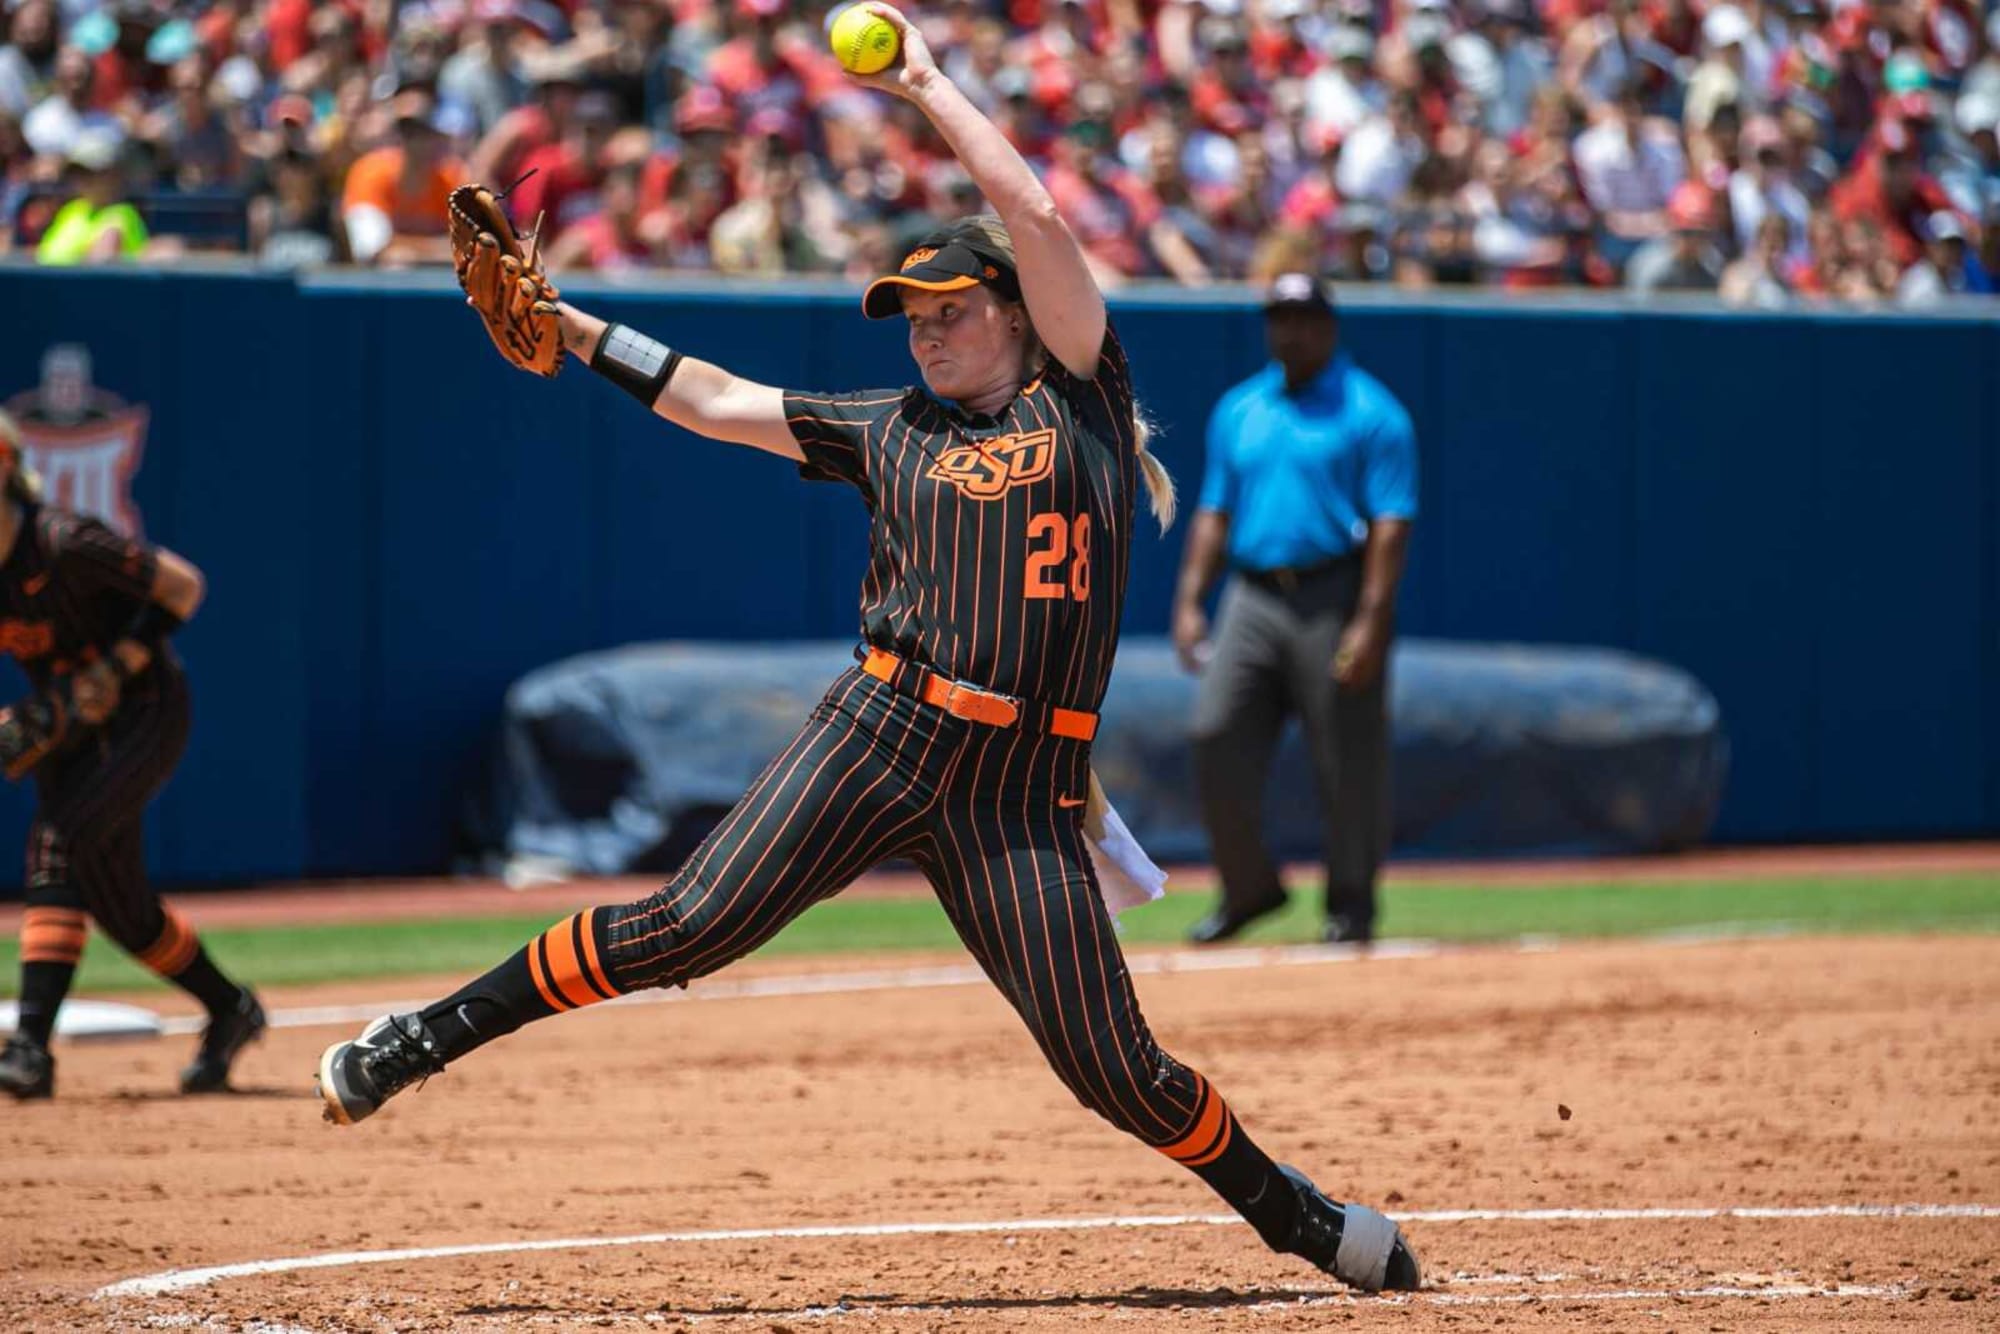 2022 NCAA Softball Tournament bracket revealed: Predictions, schedule, top storylines to watch